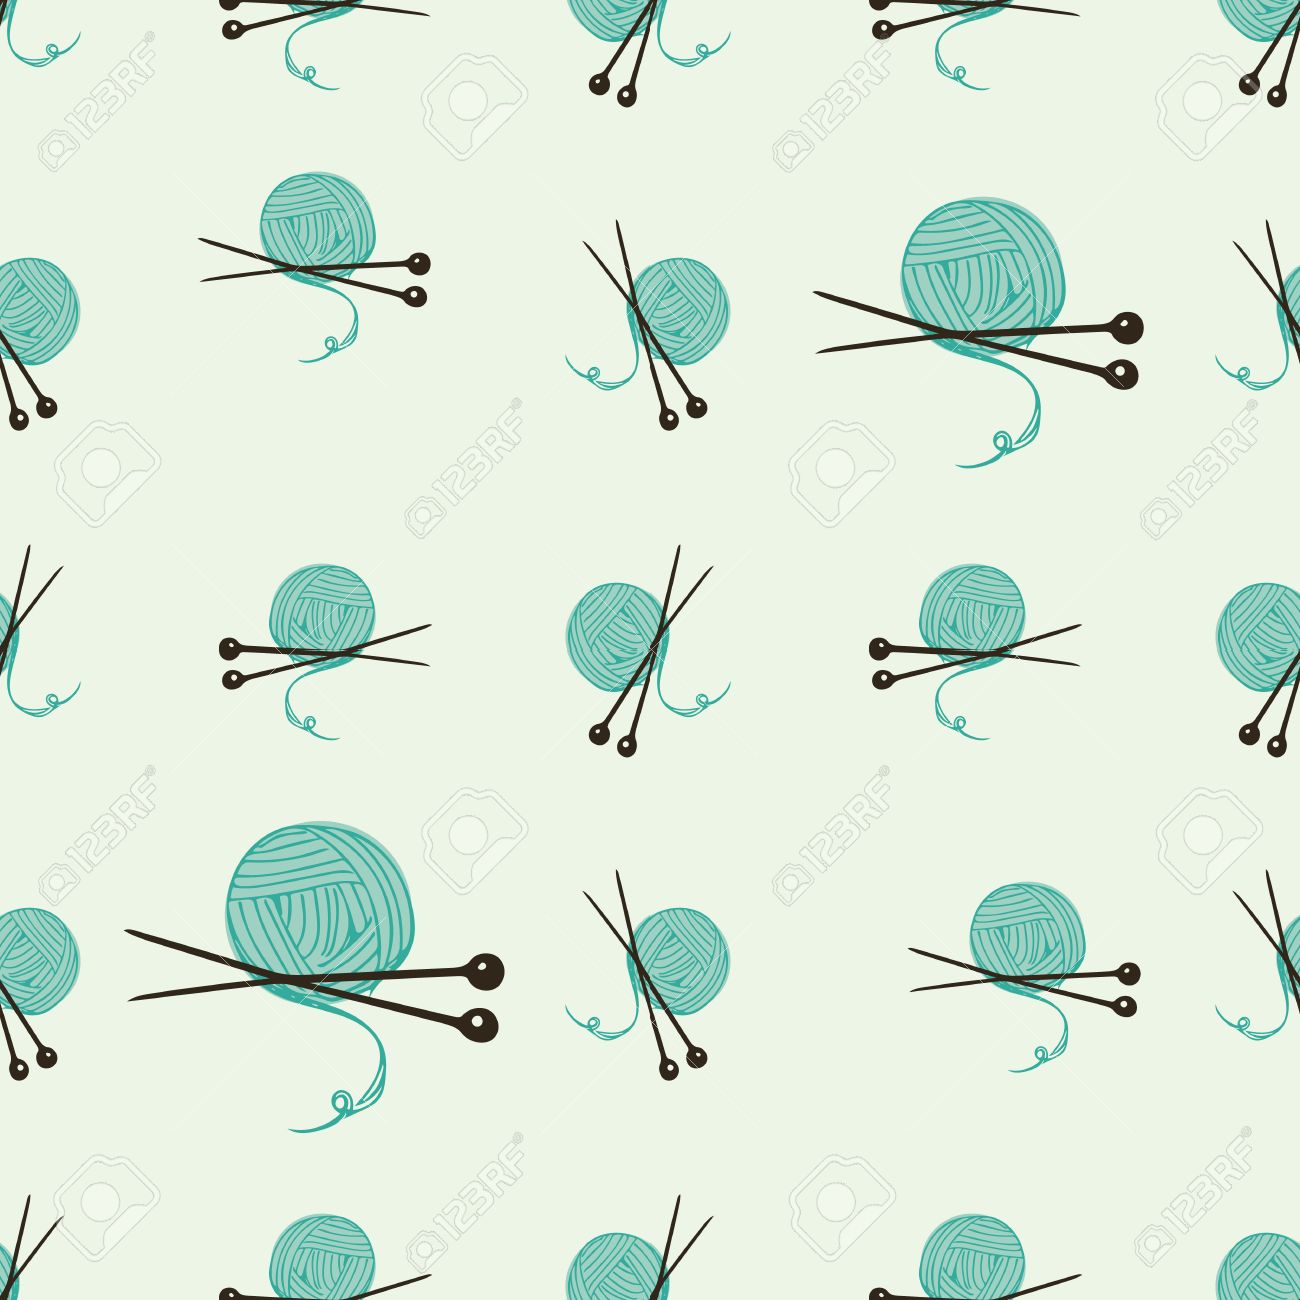 Knitting Texture. Vintage Woven Textile. Jacquard Holiday Background. Macro  Knitted Texture. Soft Thread. Nordic Christmas Carpet. Cotton Blanket  Wallpaper. Structure Knitting Texture. - Stock Image - Everypixel